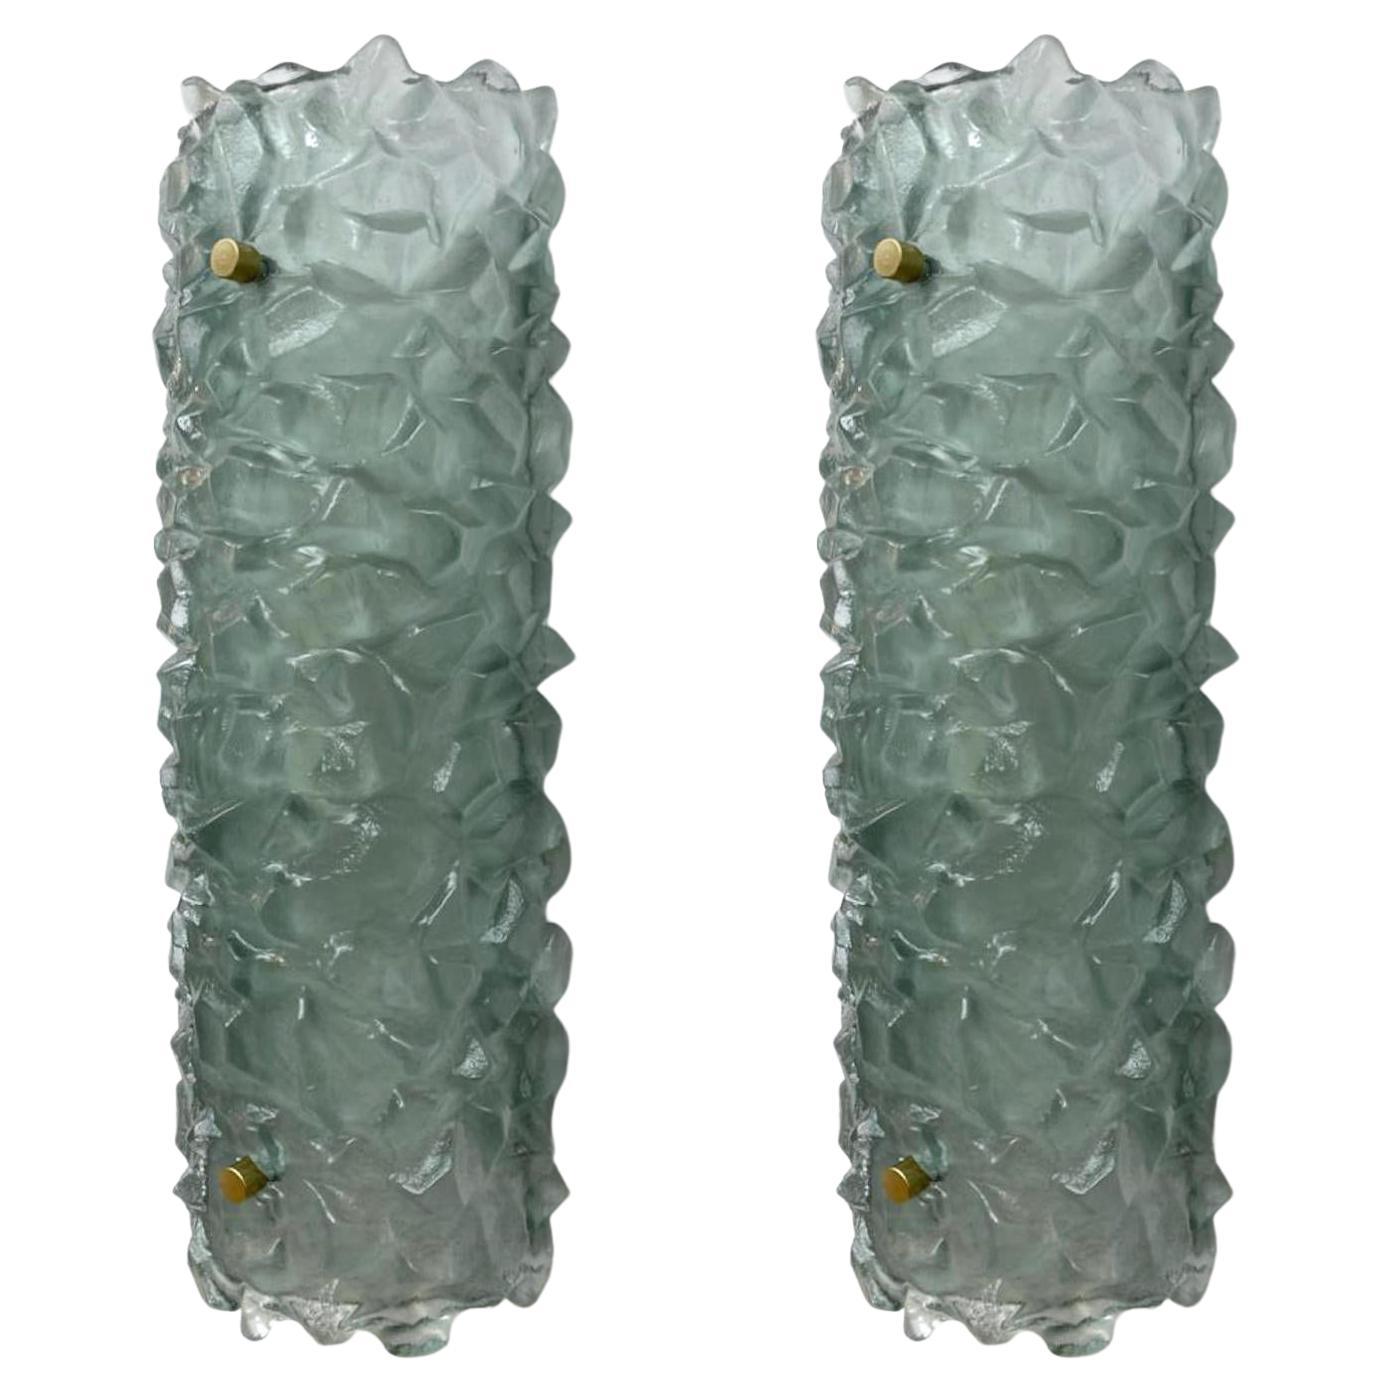 Pair of Modern Light Green Murano Sconces by Fabio Ltd - 3 Pairs Available